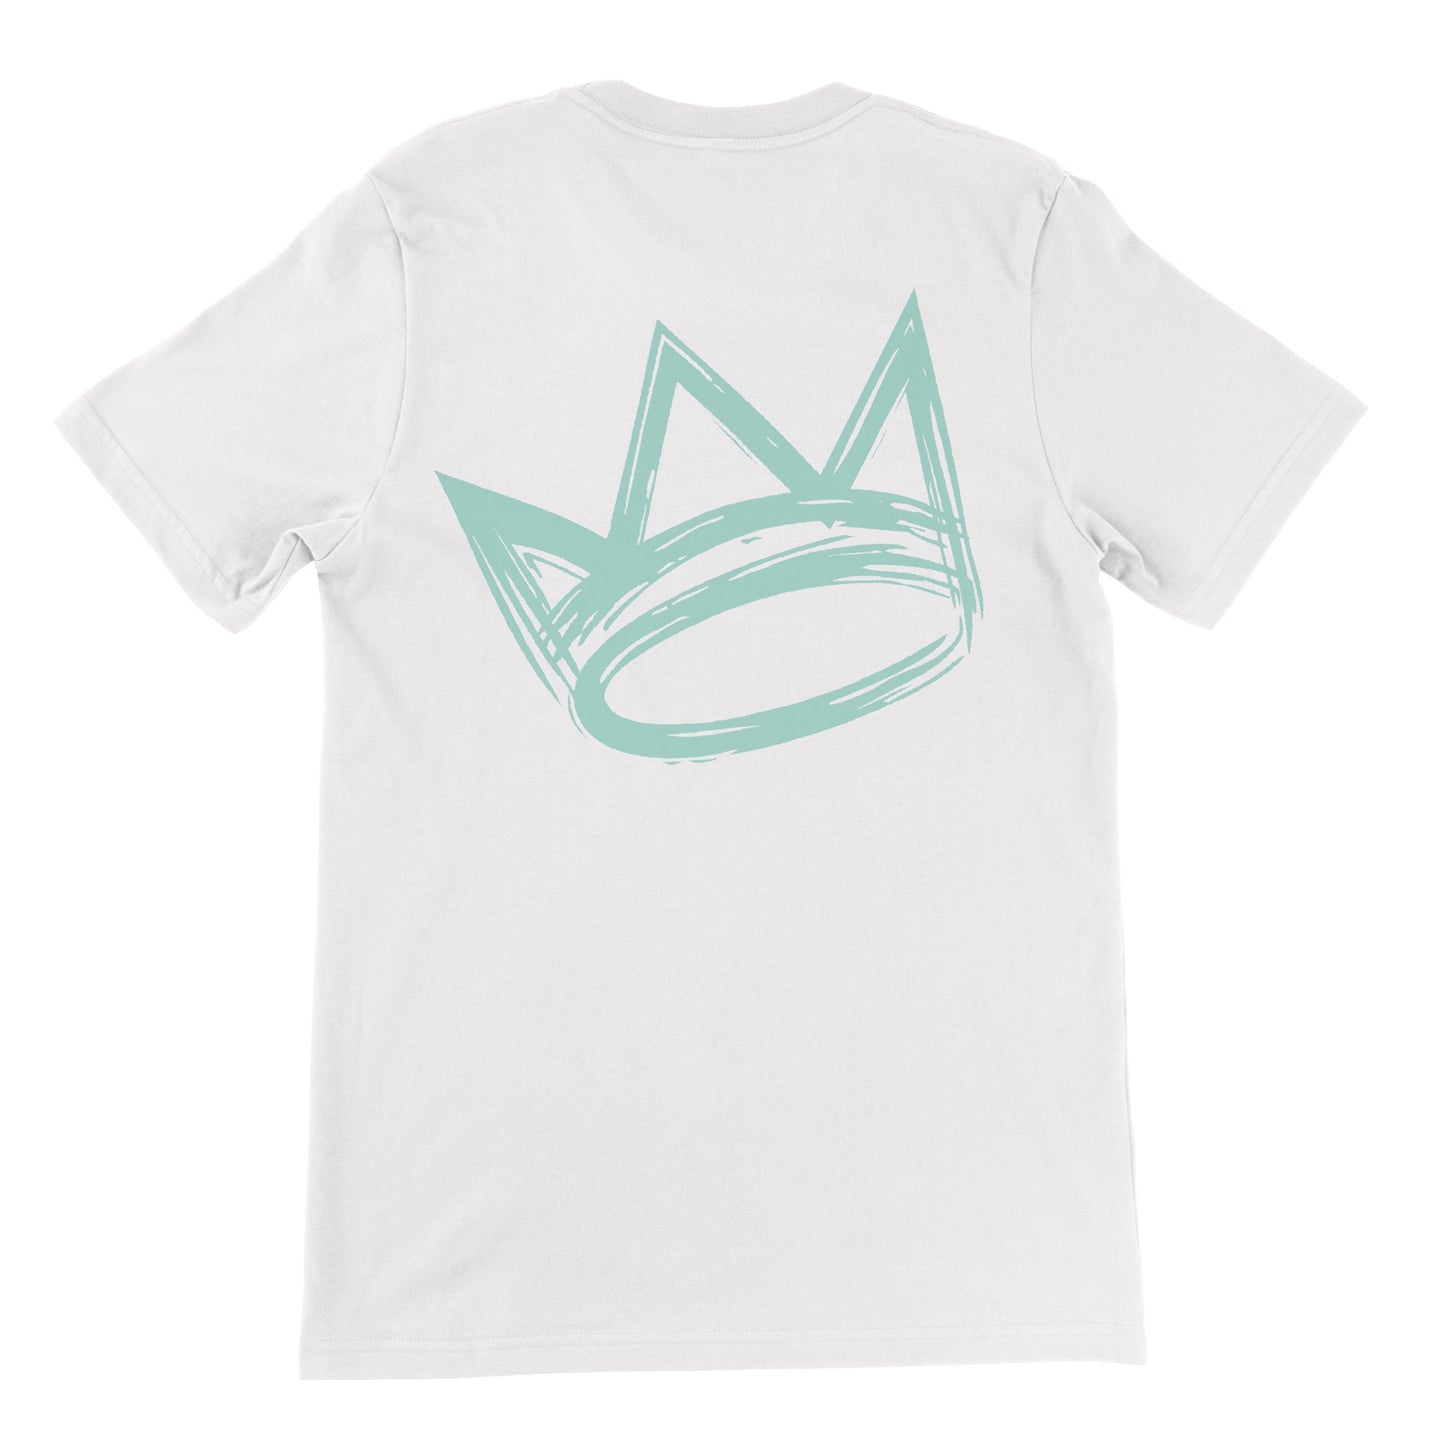 King Crown Collection (White Short Sleeve T-Shirt Mint Crown)